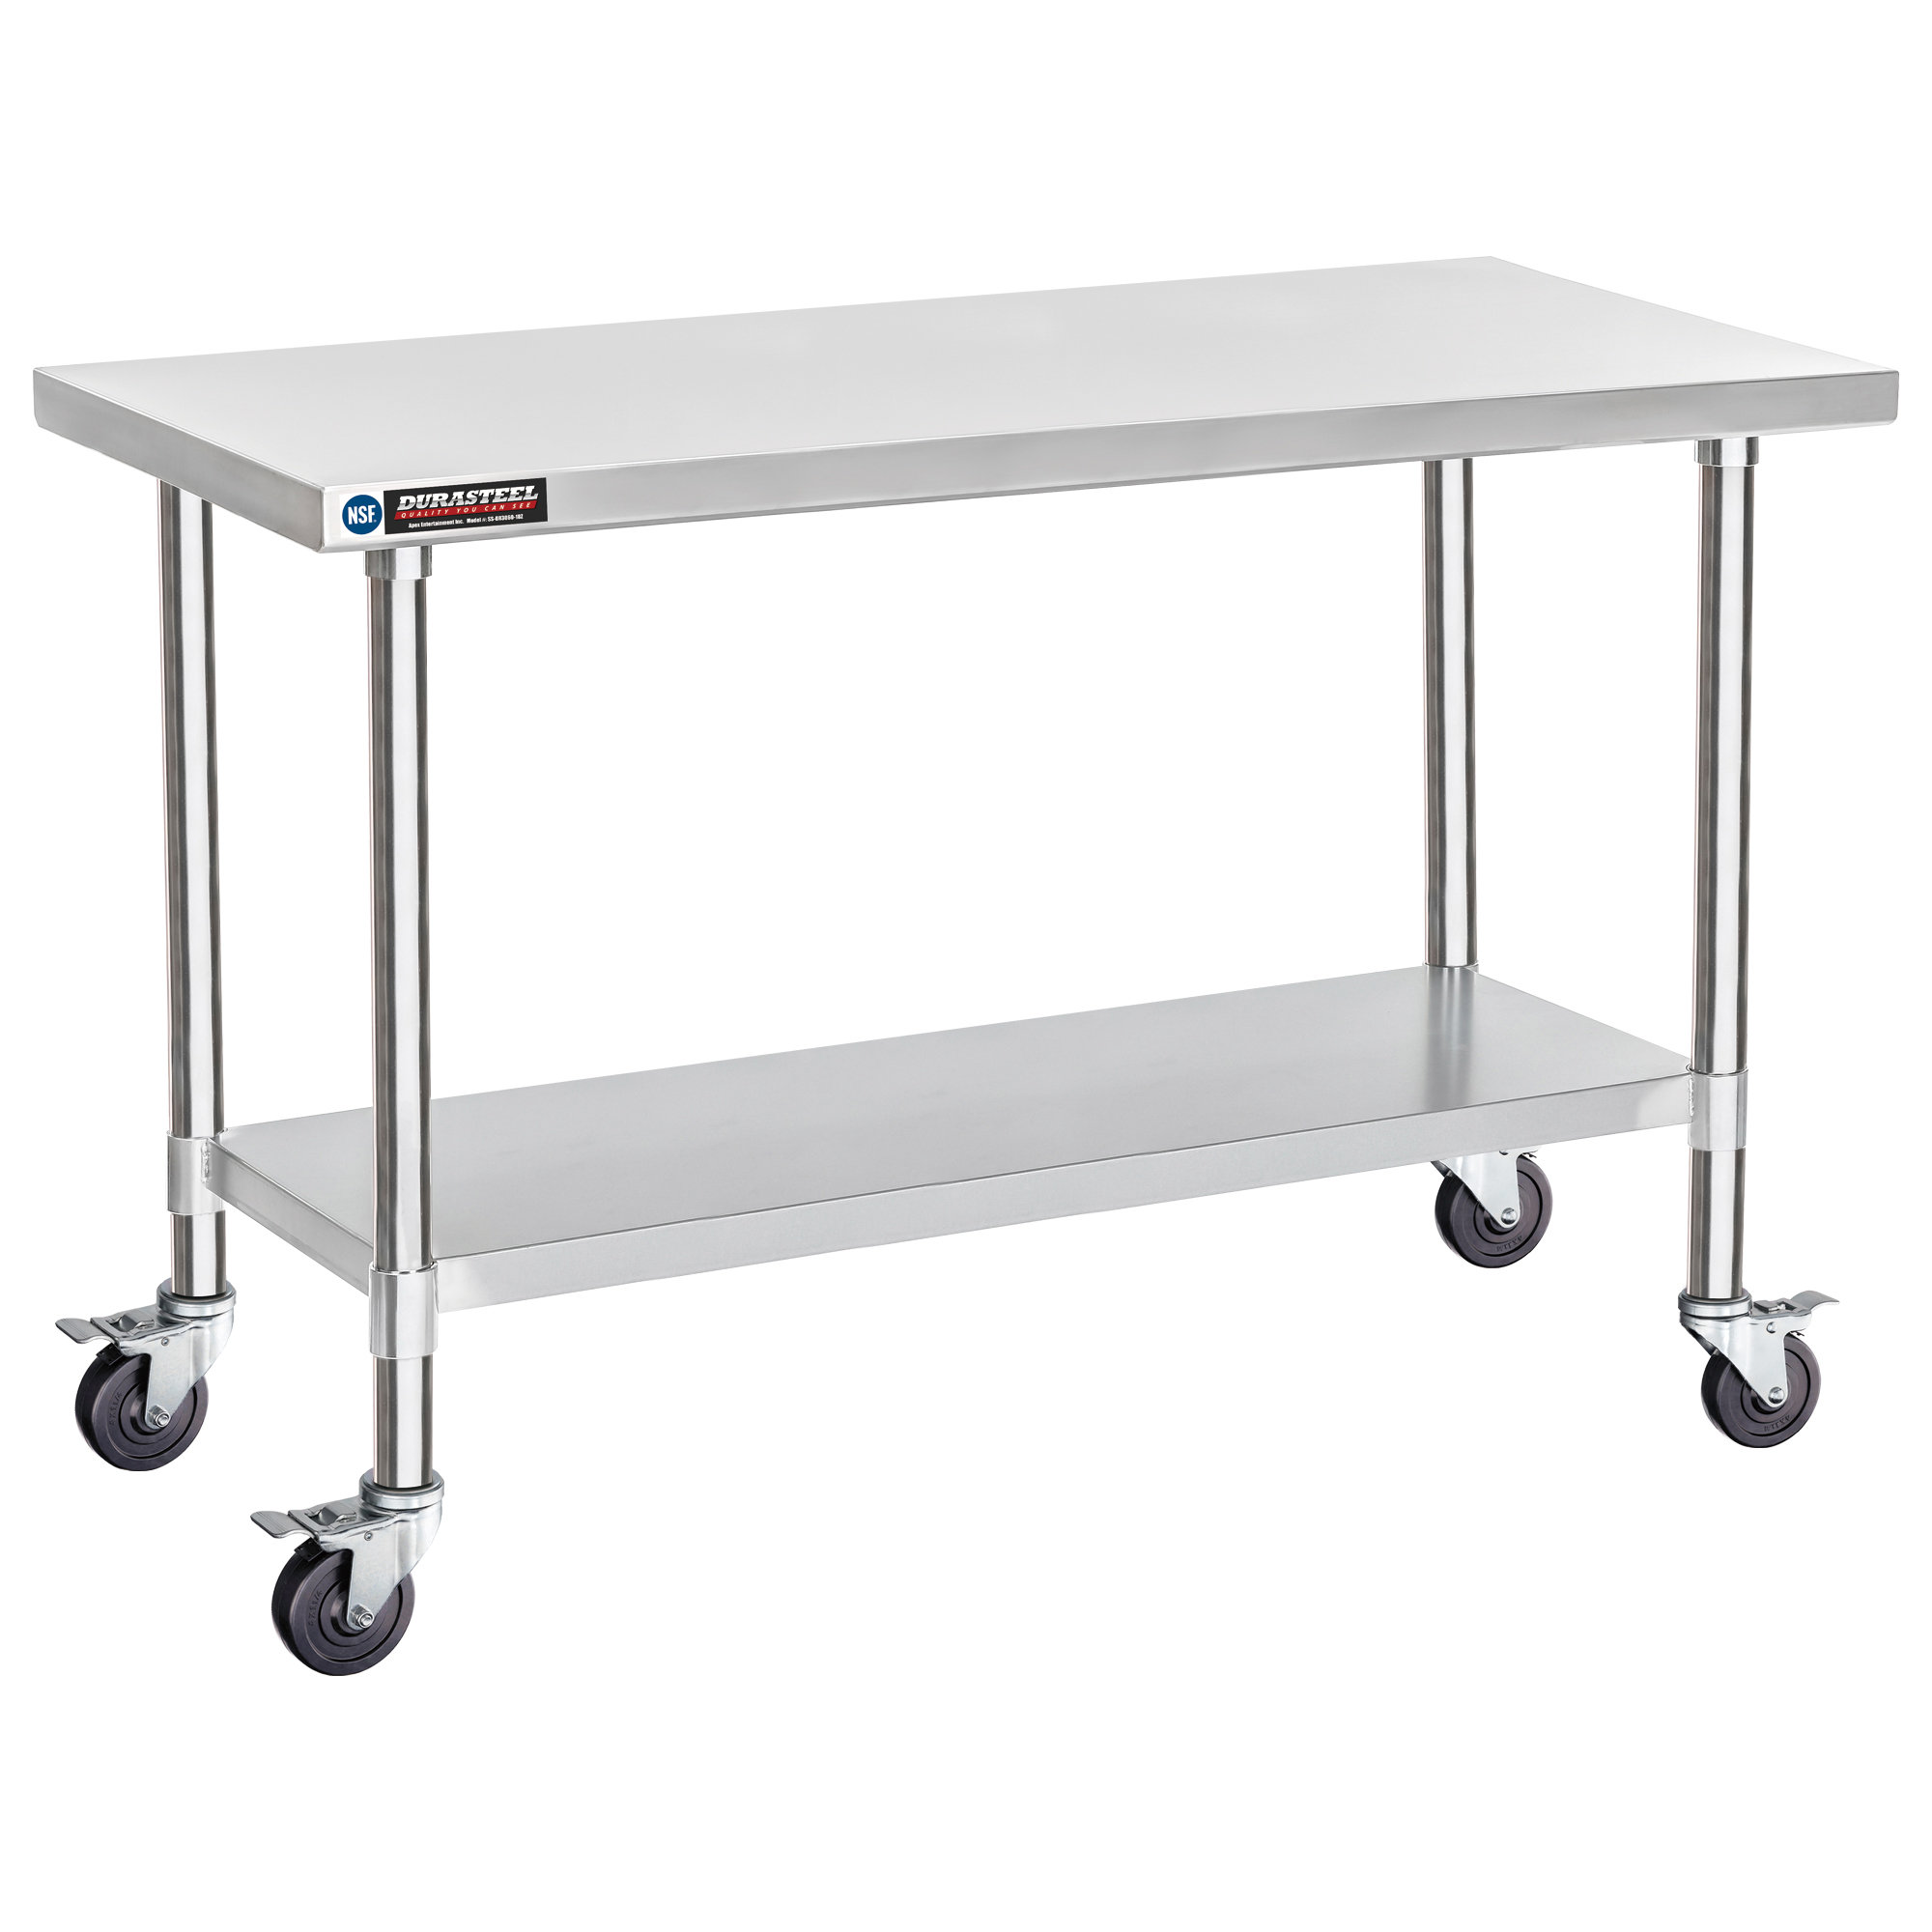 30 X 60 Stainless Steel Work Table With Undershelf